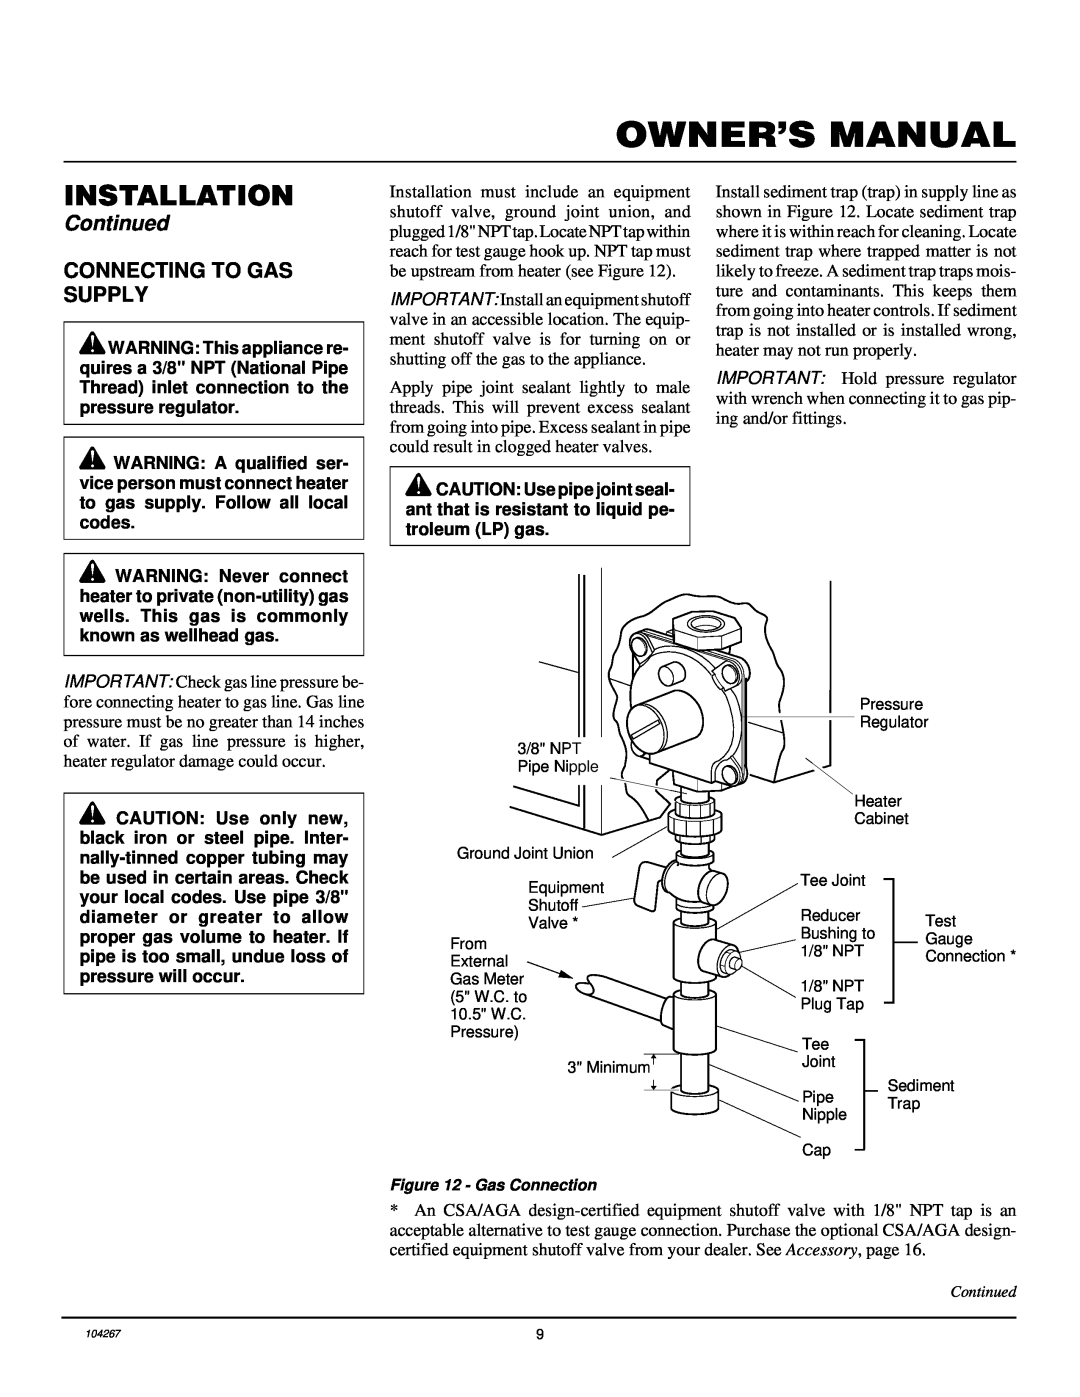 Desa CGN10TA, CGN10TLA installation manual Connecting To Gas Supply, Installation, Continued, Gas Connection 